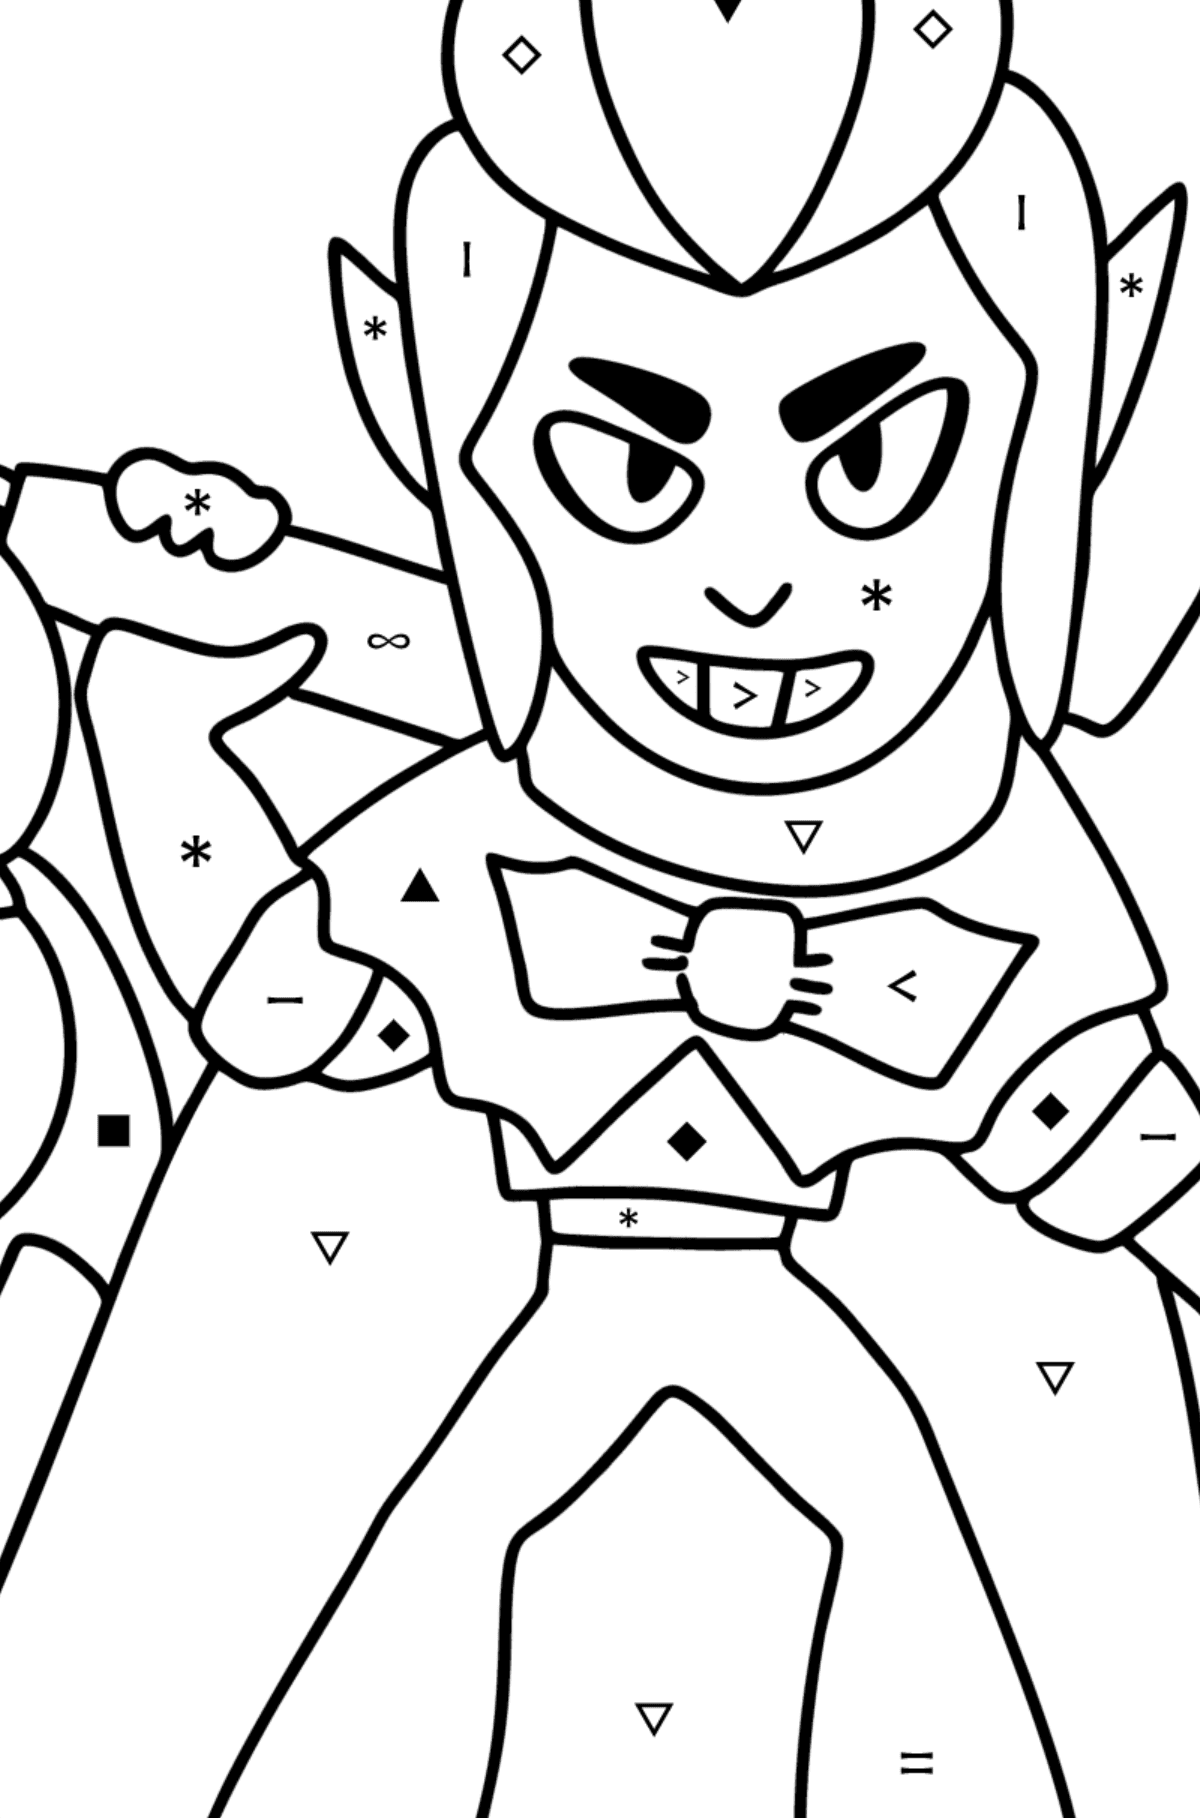 Brawl Stars Mortis coloring page - Coloring by Symbols for Kids